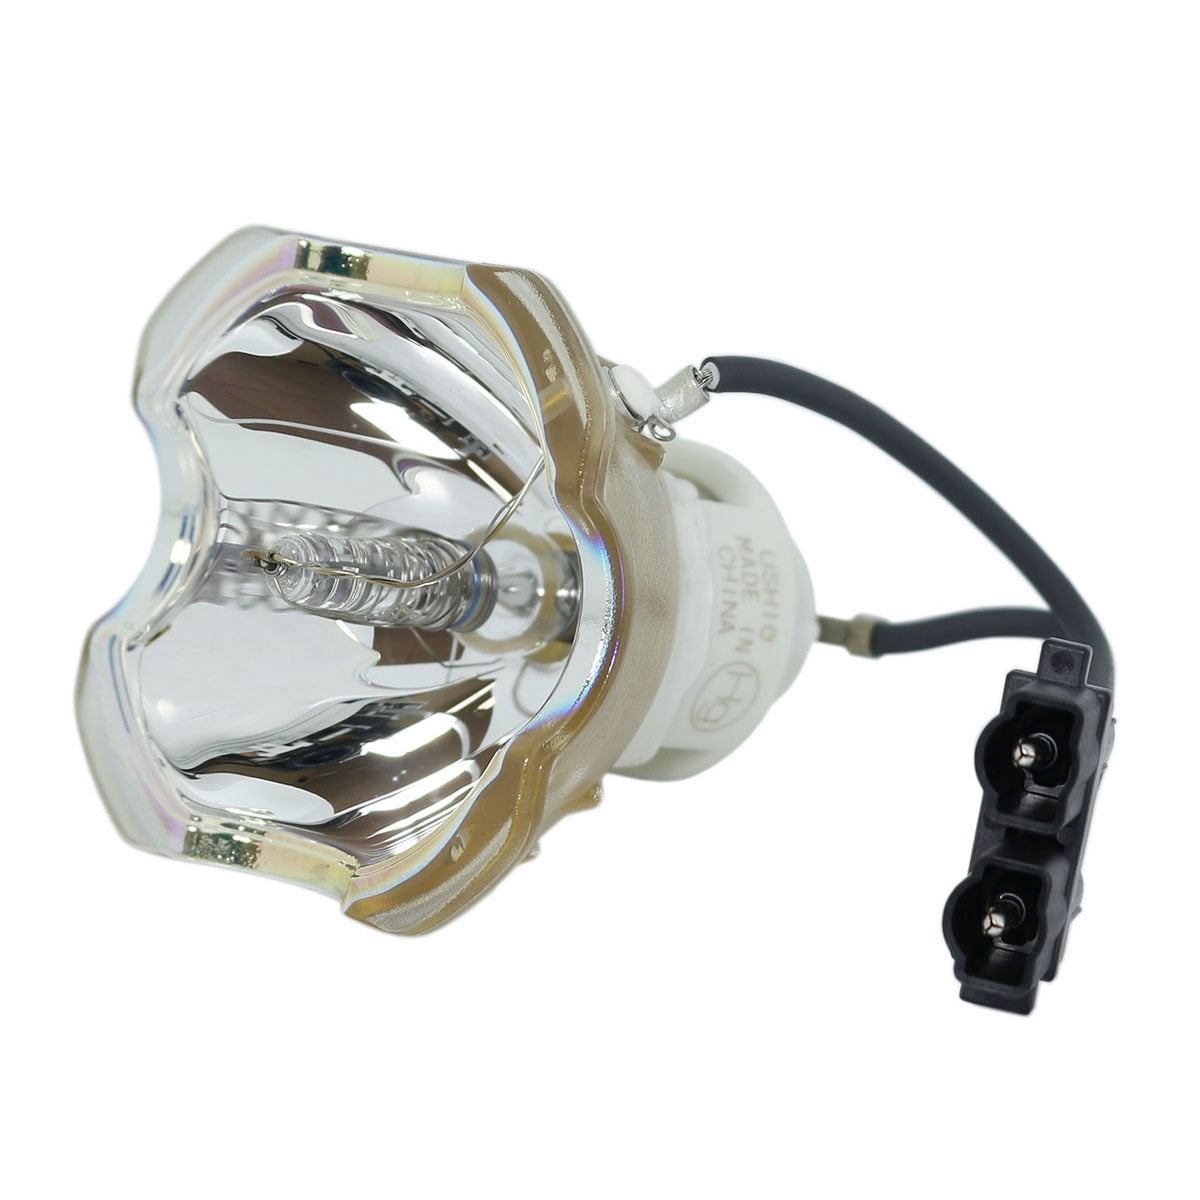 Replacement for Infocus C445 Lamp & Housing Projector Tv Lamp Bulb by Technical Precision 